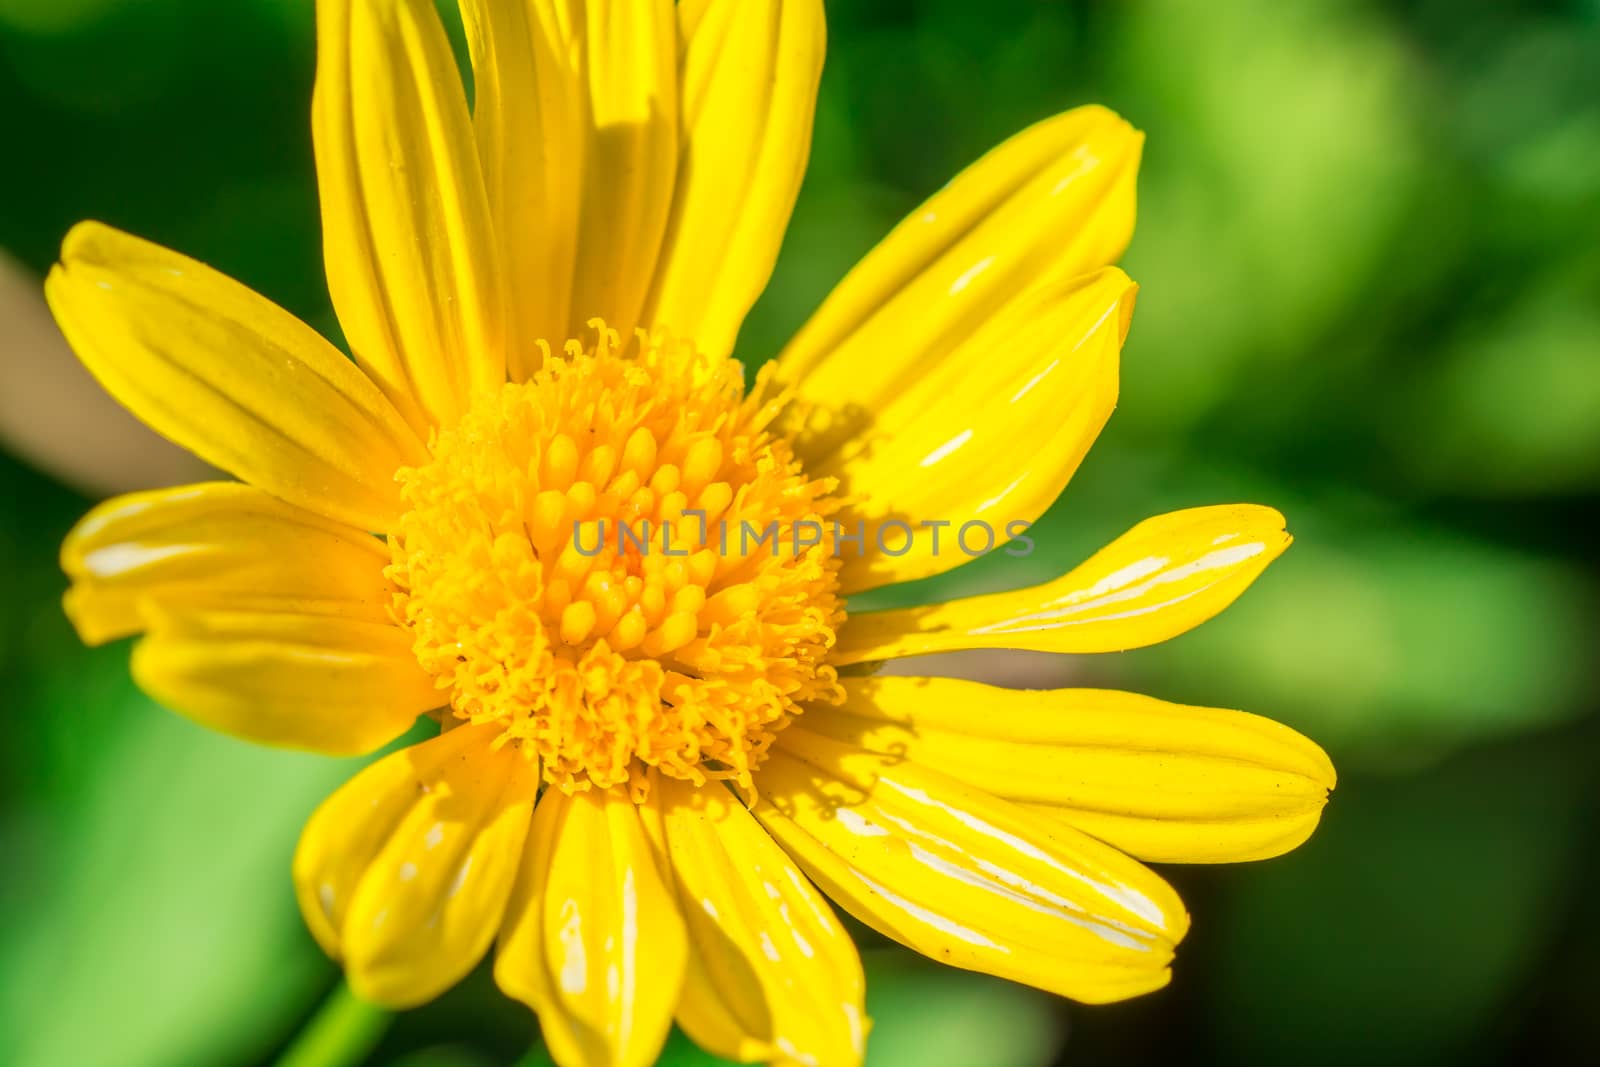 The beautiful yellow flower in the national park